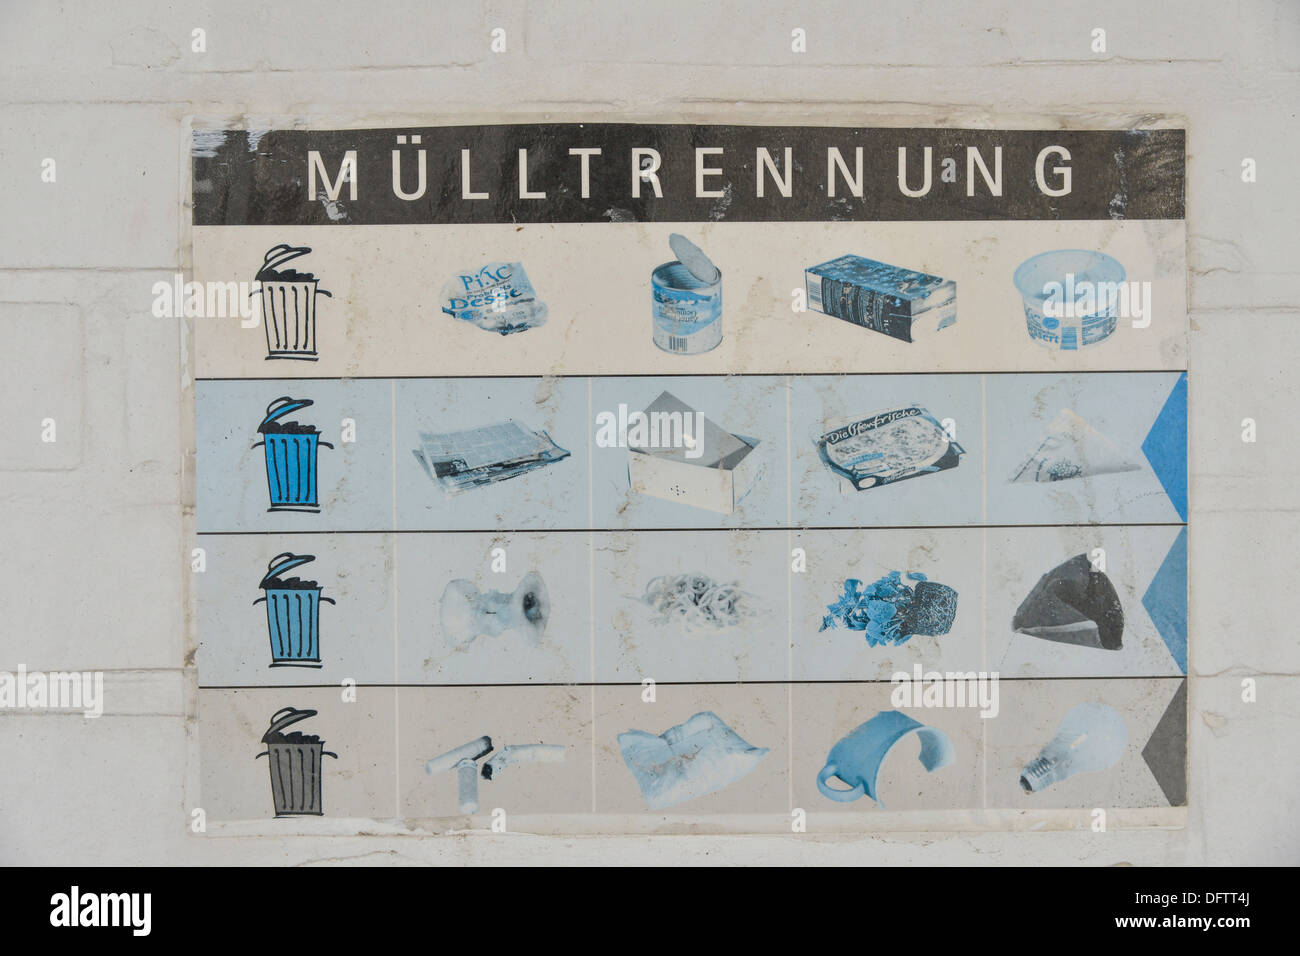 Sign 'Muelltrennung', German for 'waste separation' Stock Photo